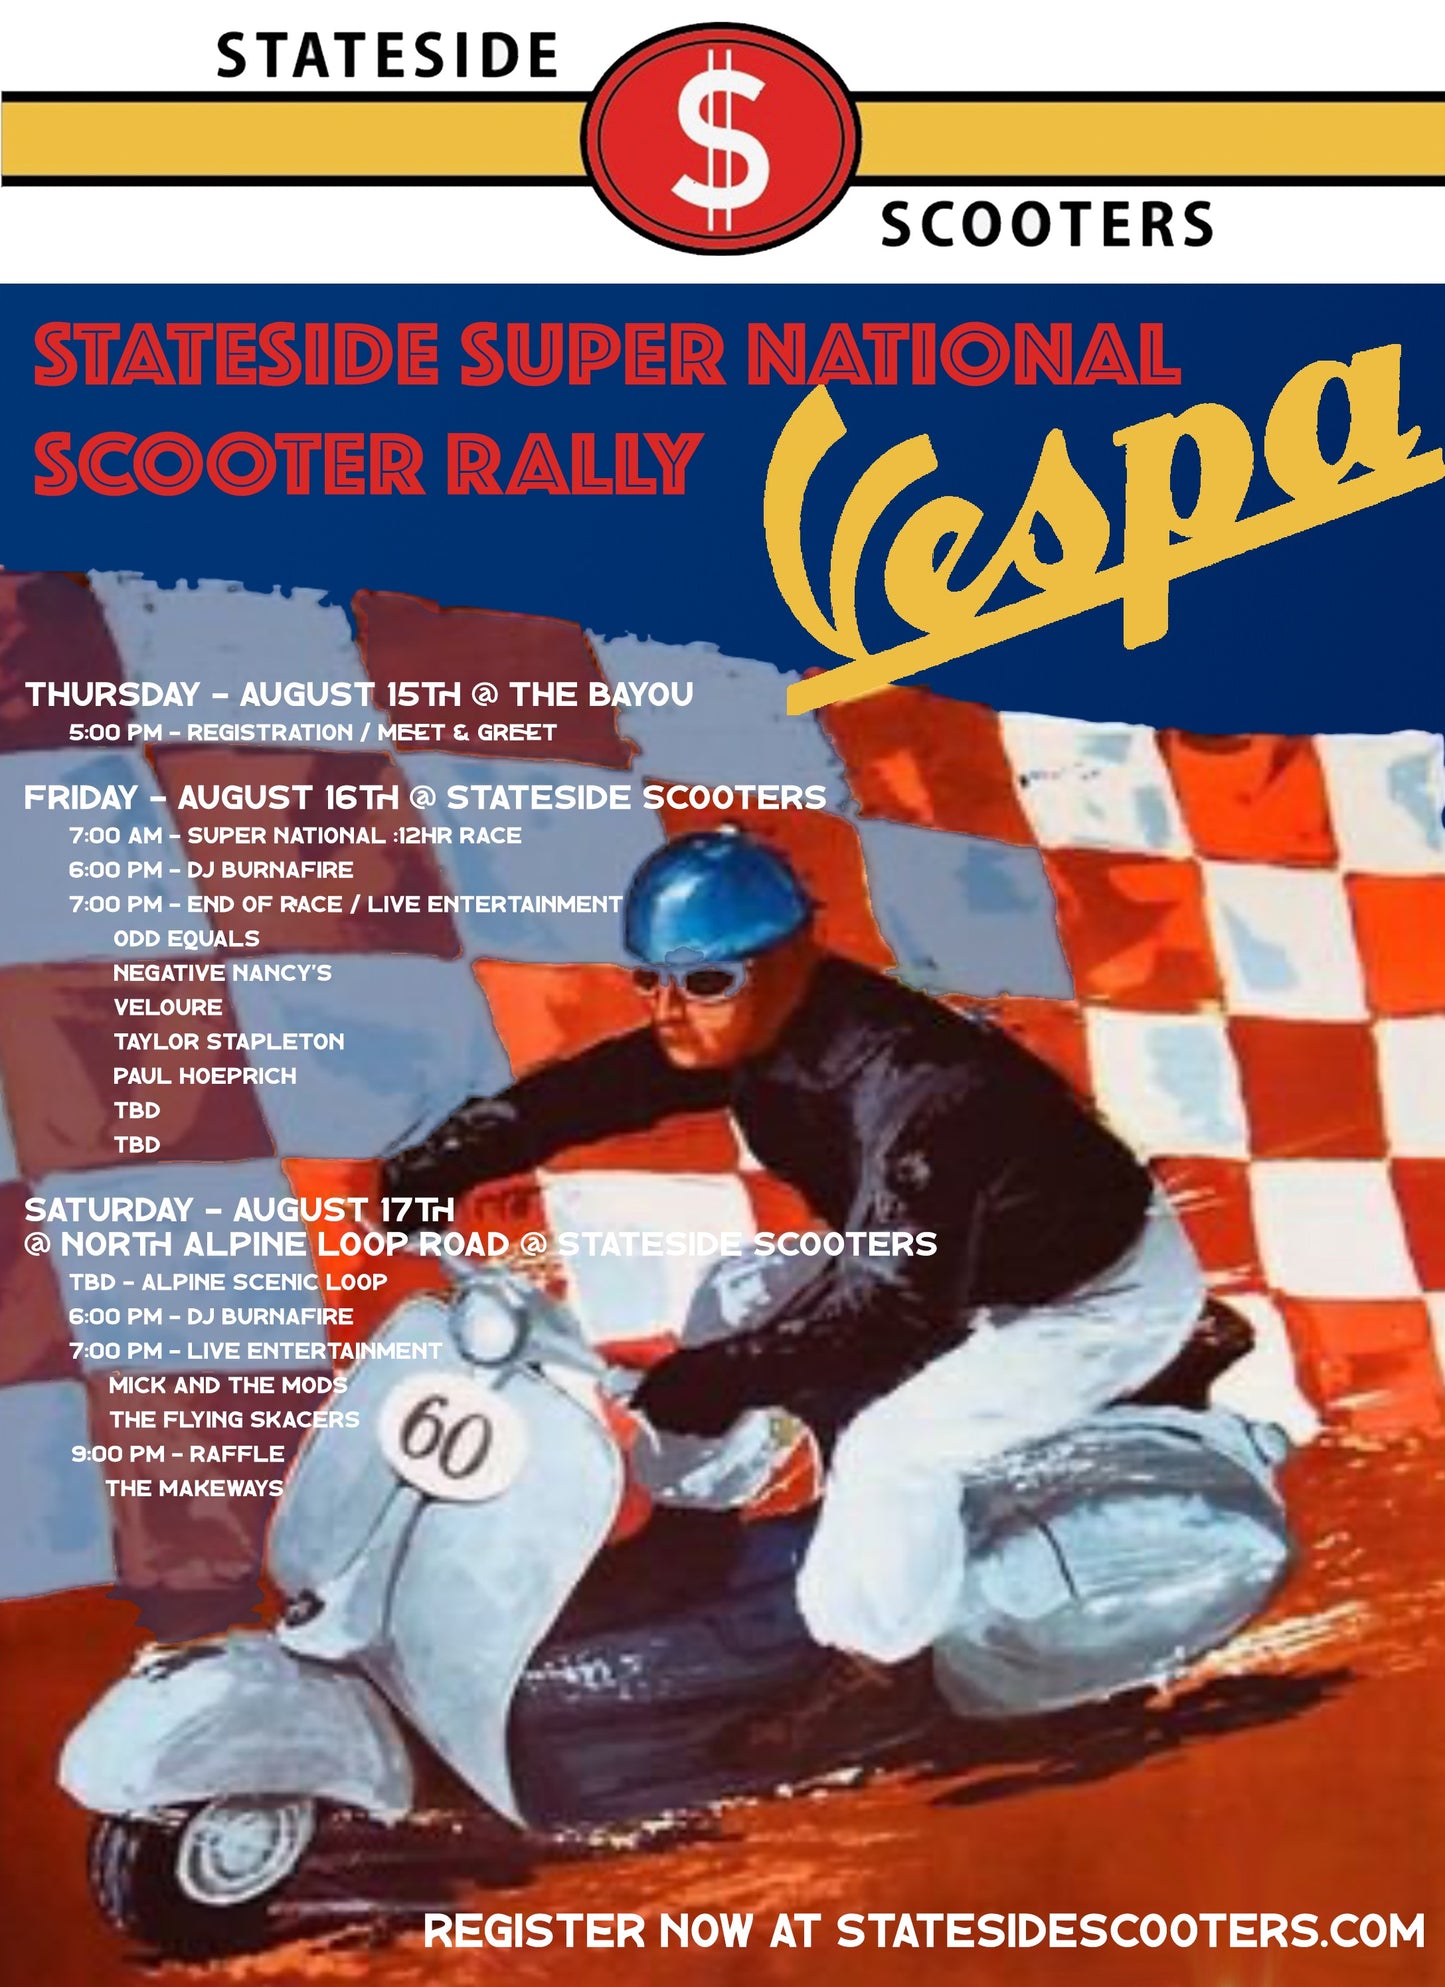 Stateside Super National Scooter Rally